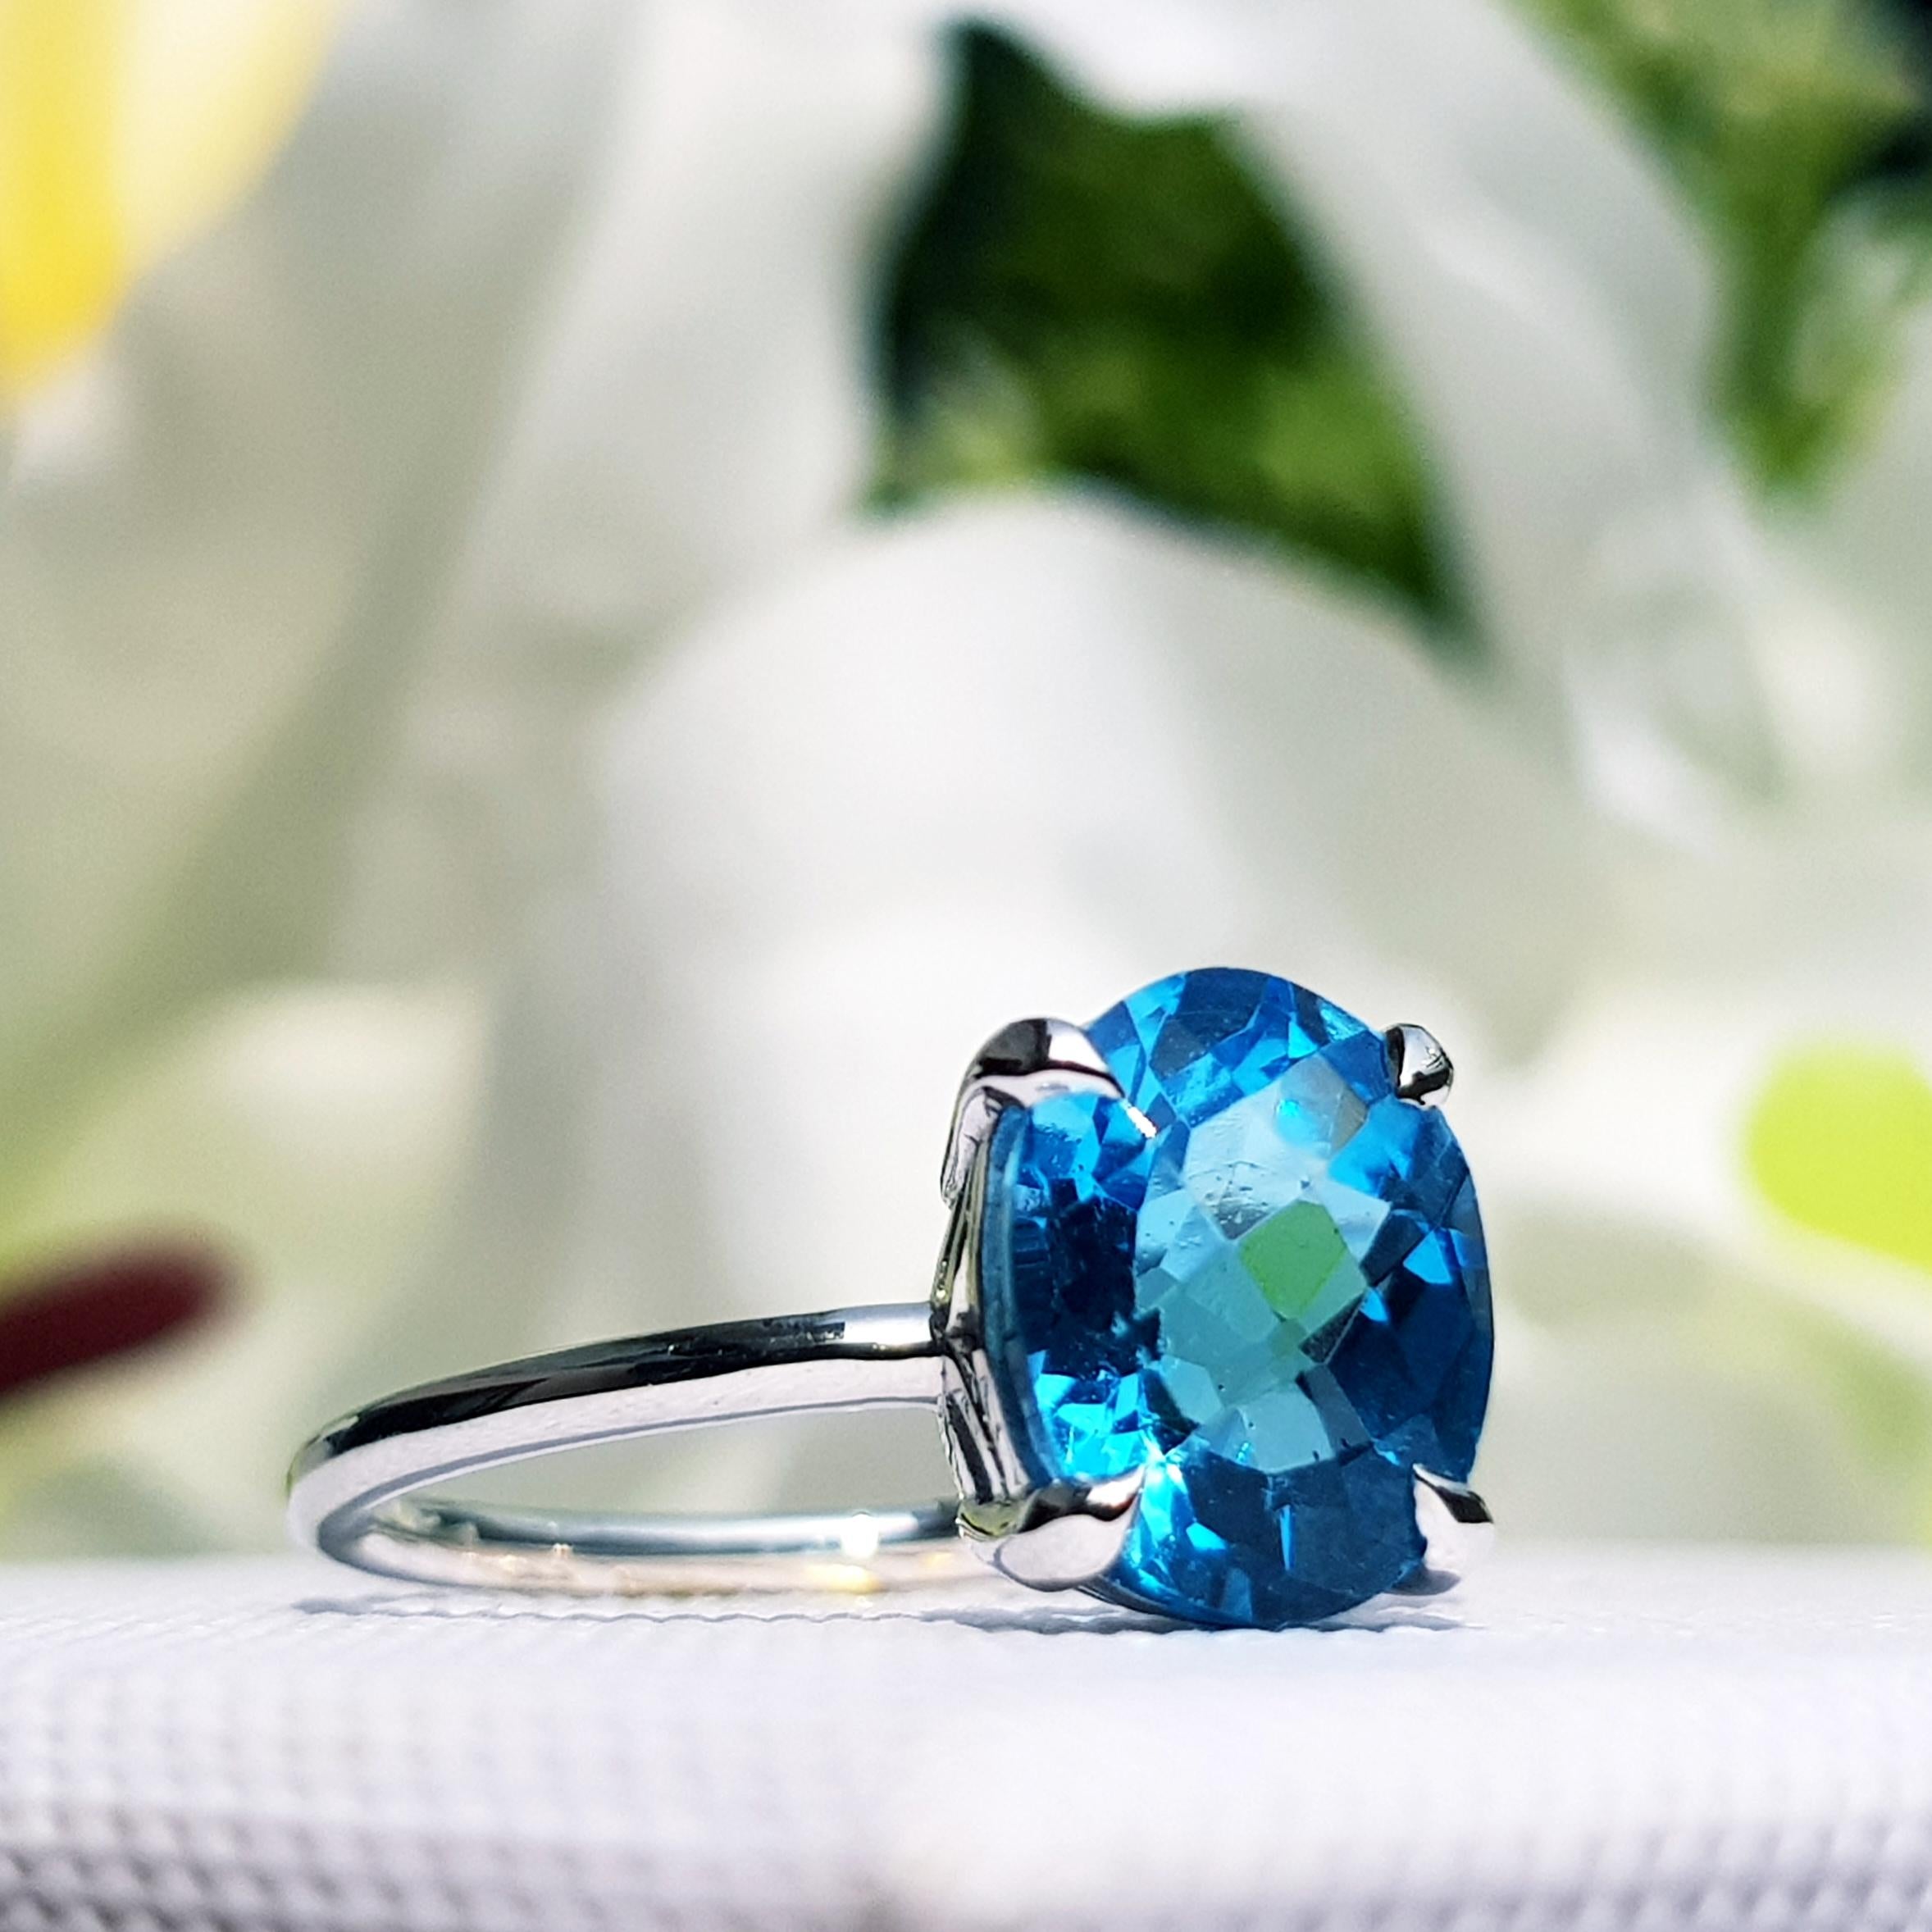 Deep blue sparkle and a modern 9k white gold setting make this Swiss blue topaz modern solitaire ring a striking pick. An oval 3.50 carats Swill blue topaz is the star of this piece and it’s held by four prongs. A simple and shining band crafted